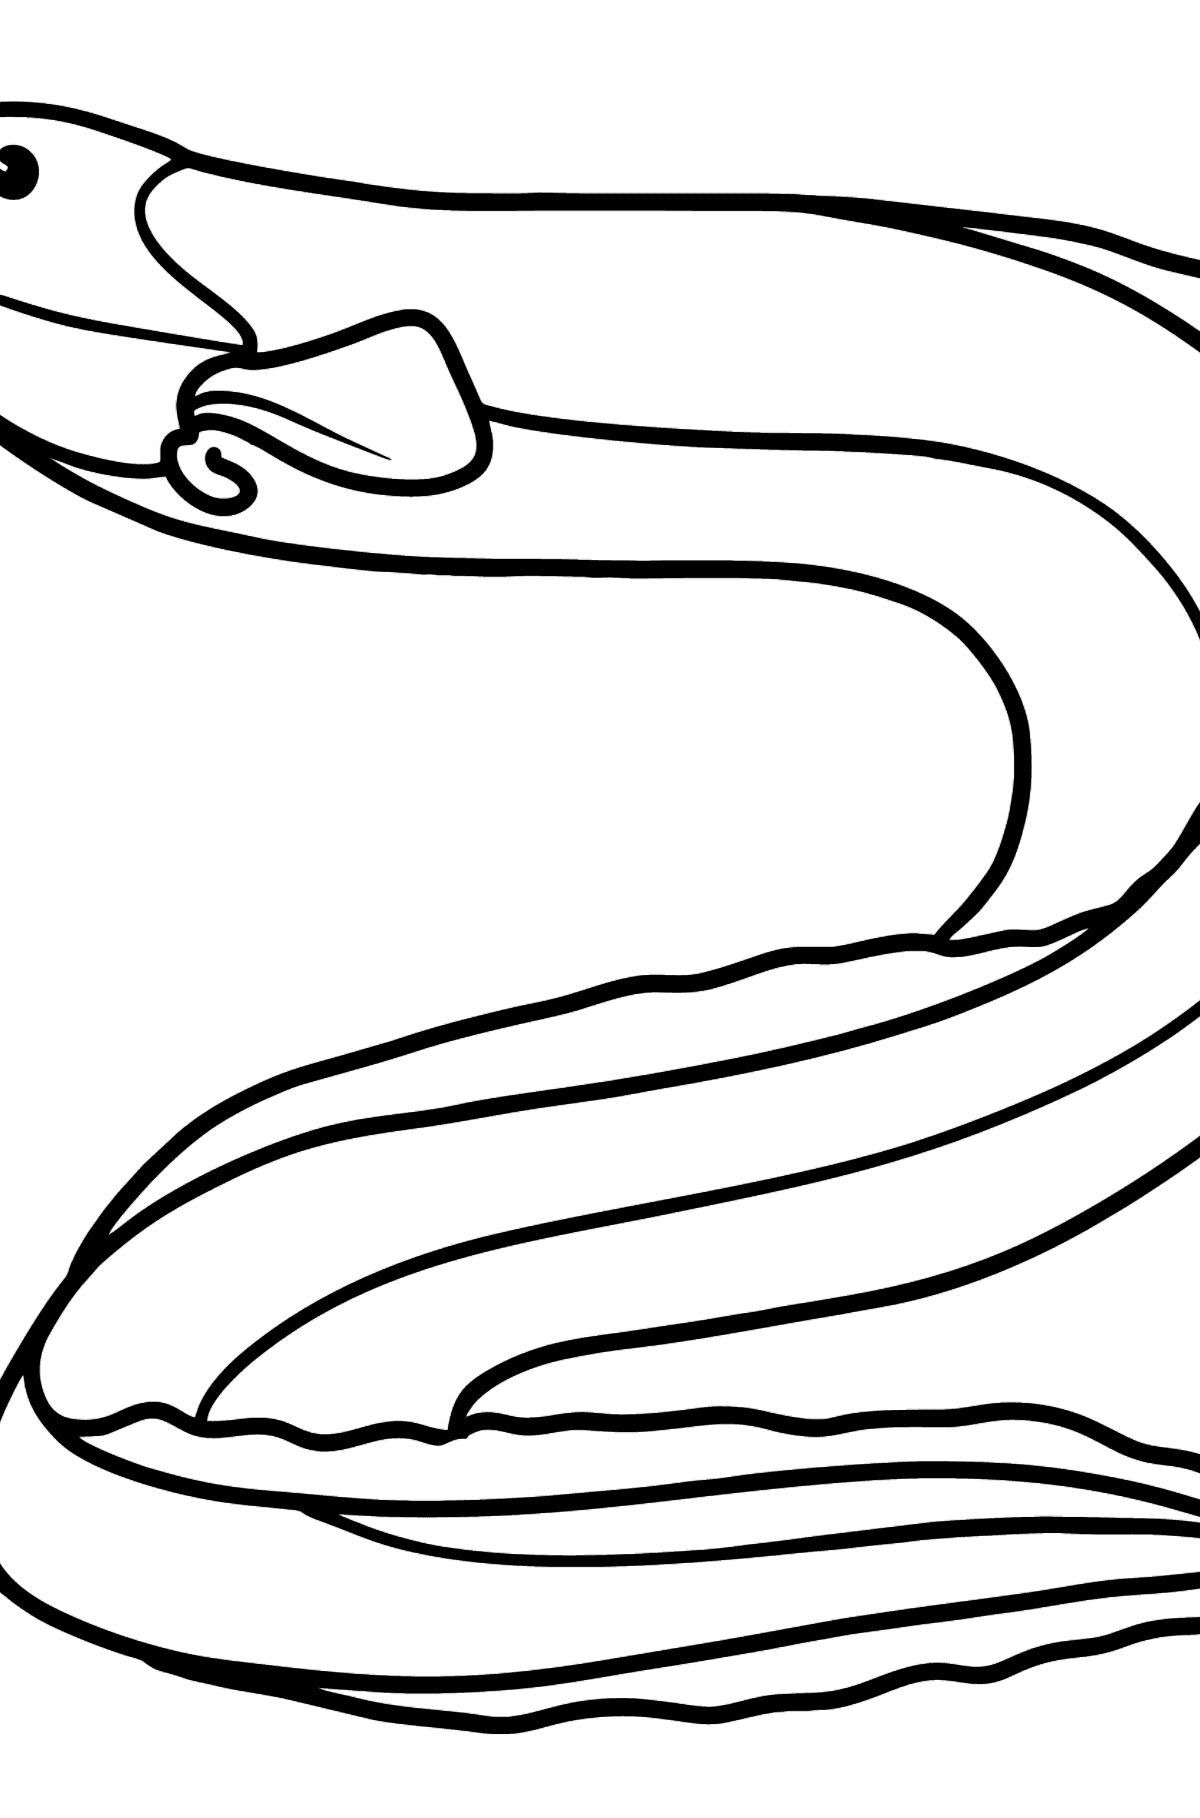 Eel coloring page - Coloring Pages for Kids